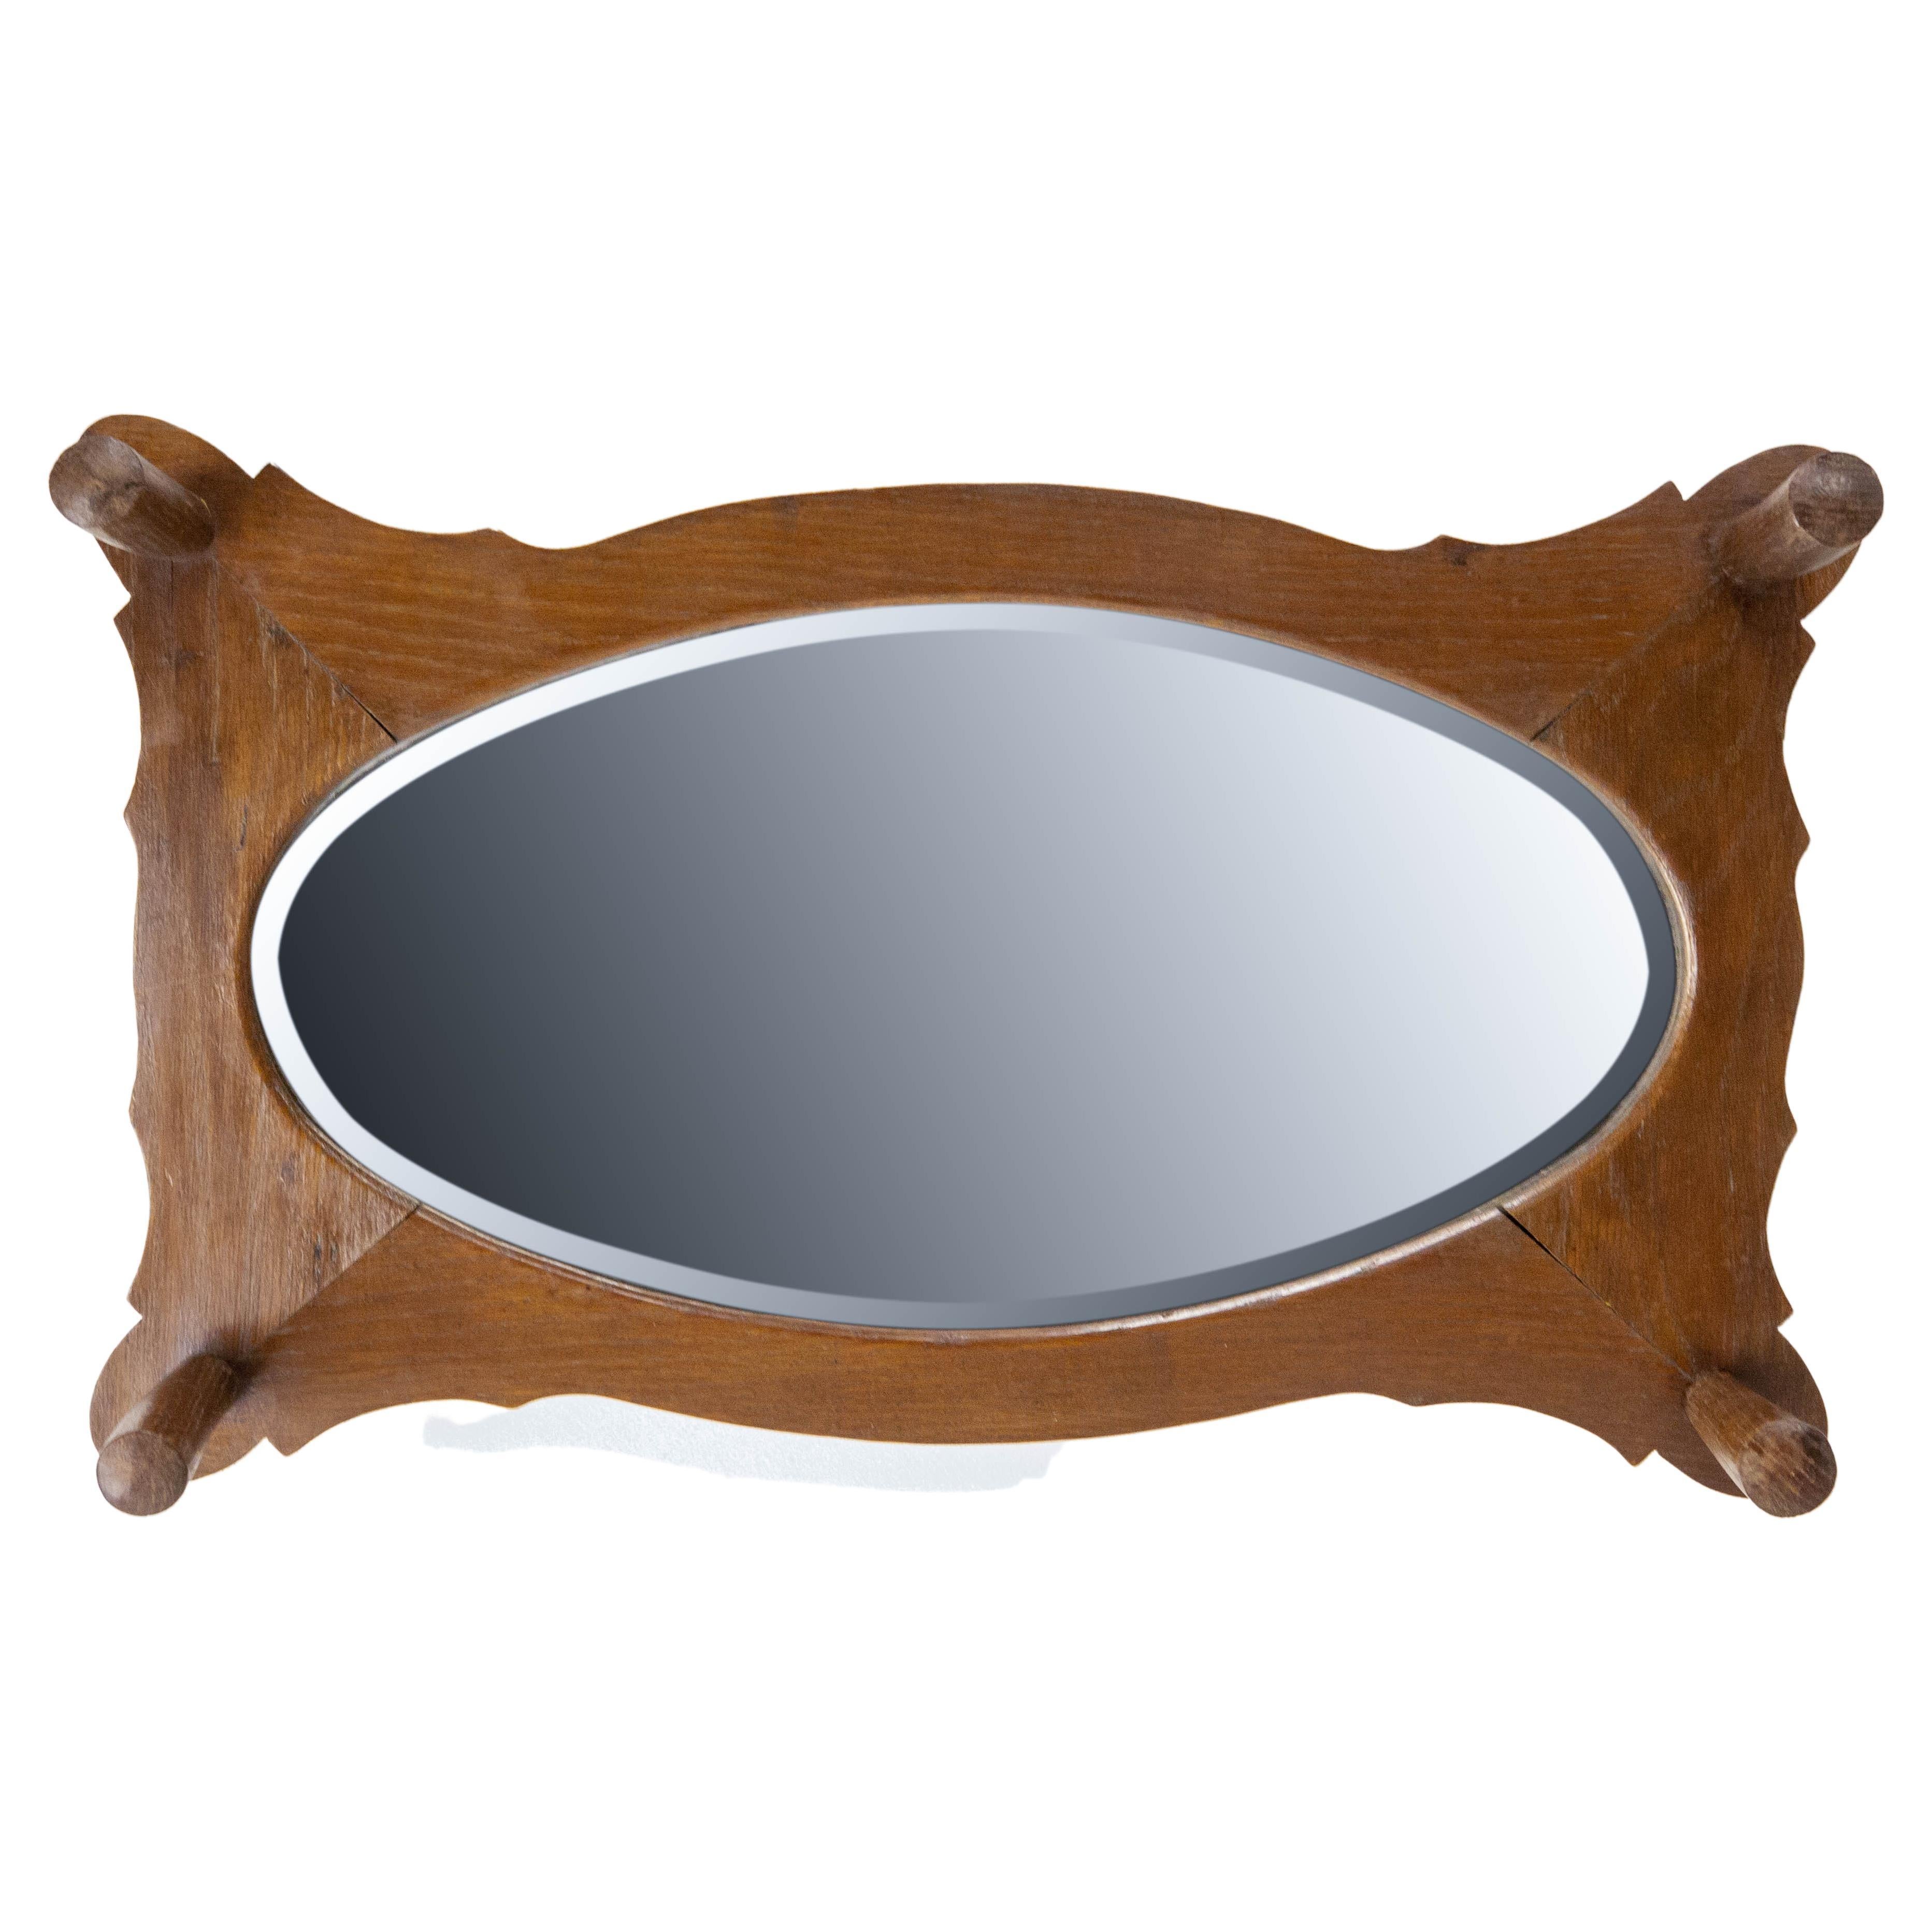 Entry Coat Rack Porte Manteau Oval Beveled Mirror French, Early 20th Century